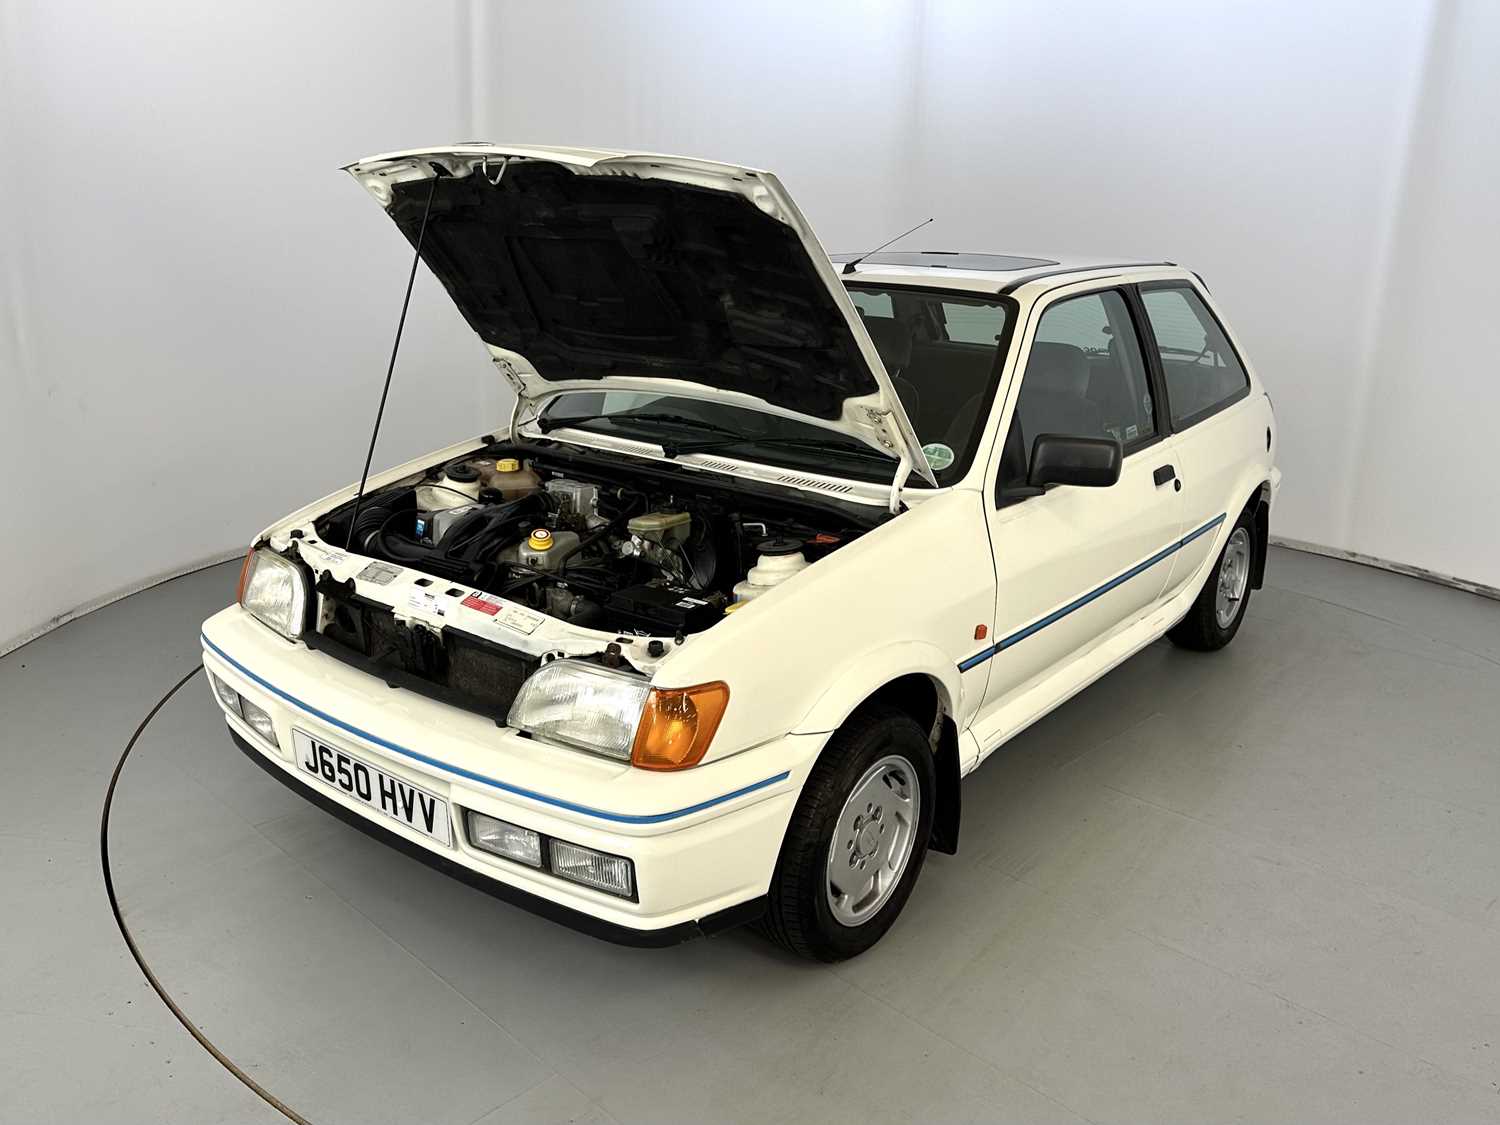 1991 Ford Fiesta XR2i - Image 29 of 30